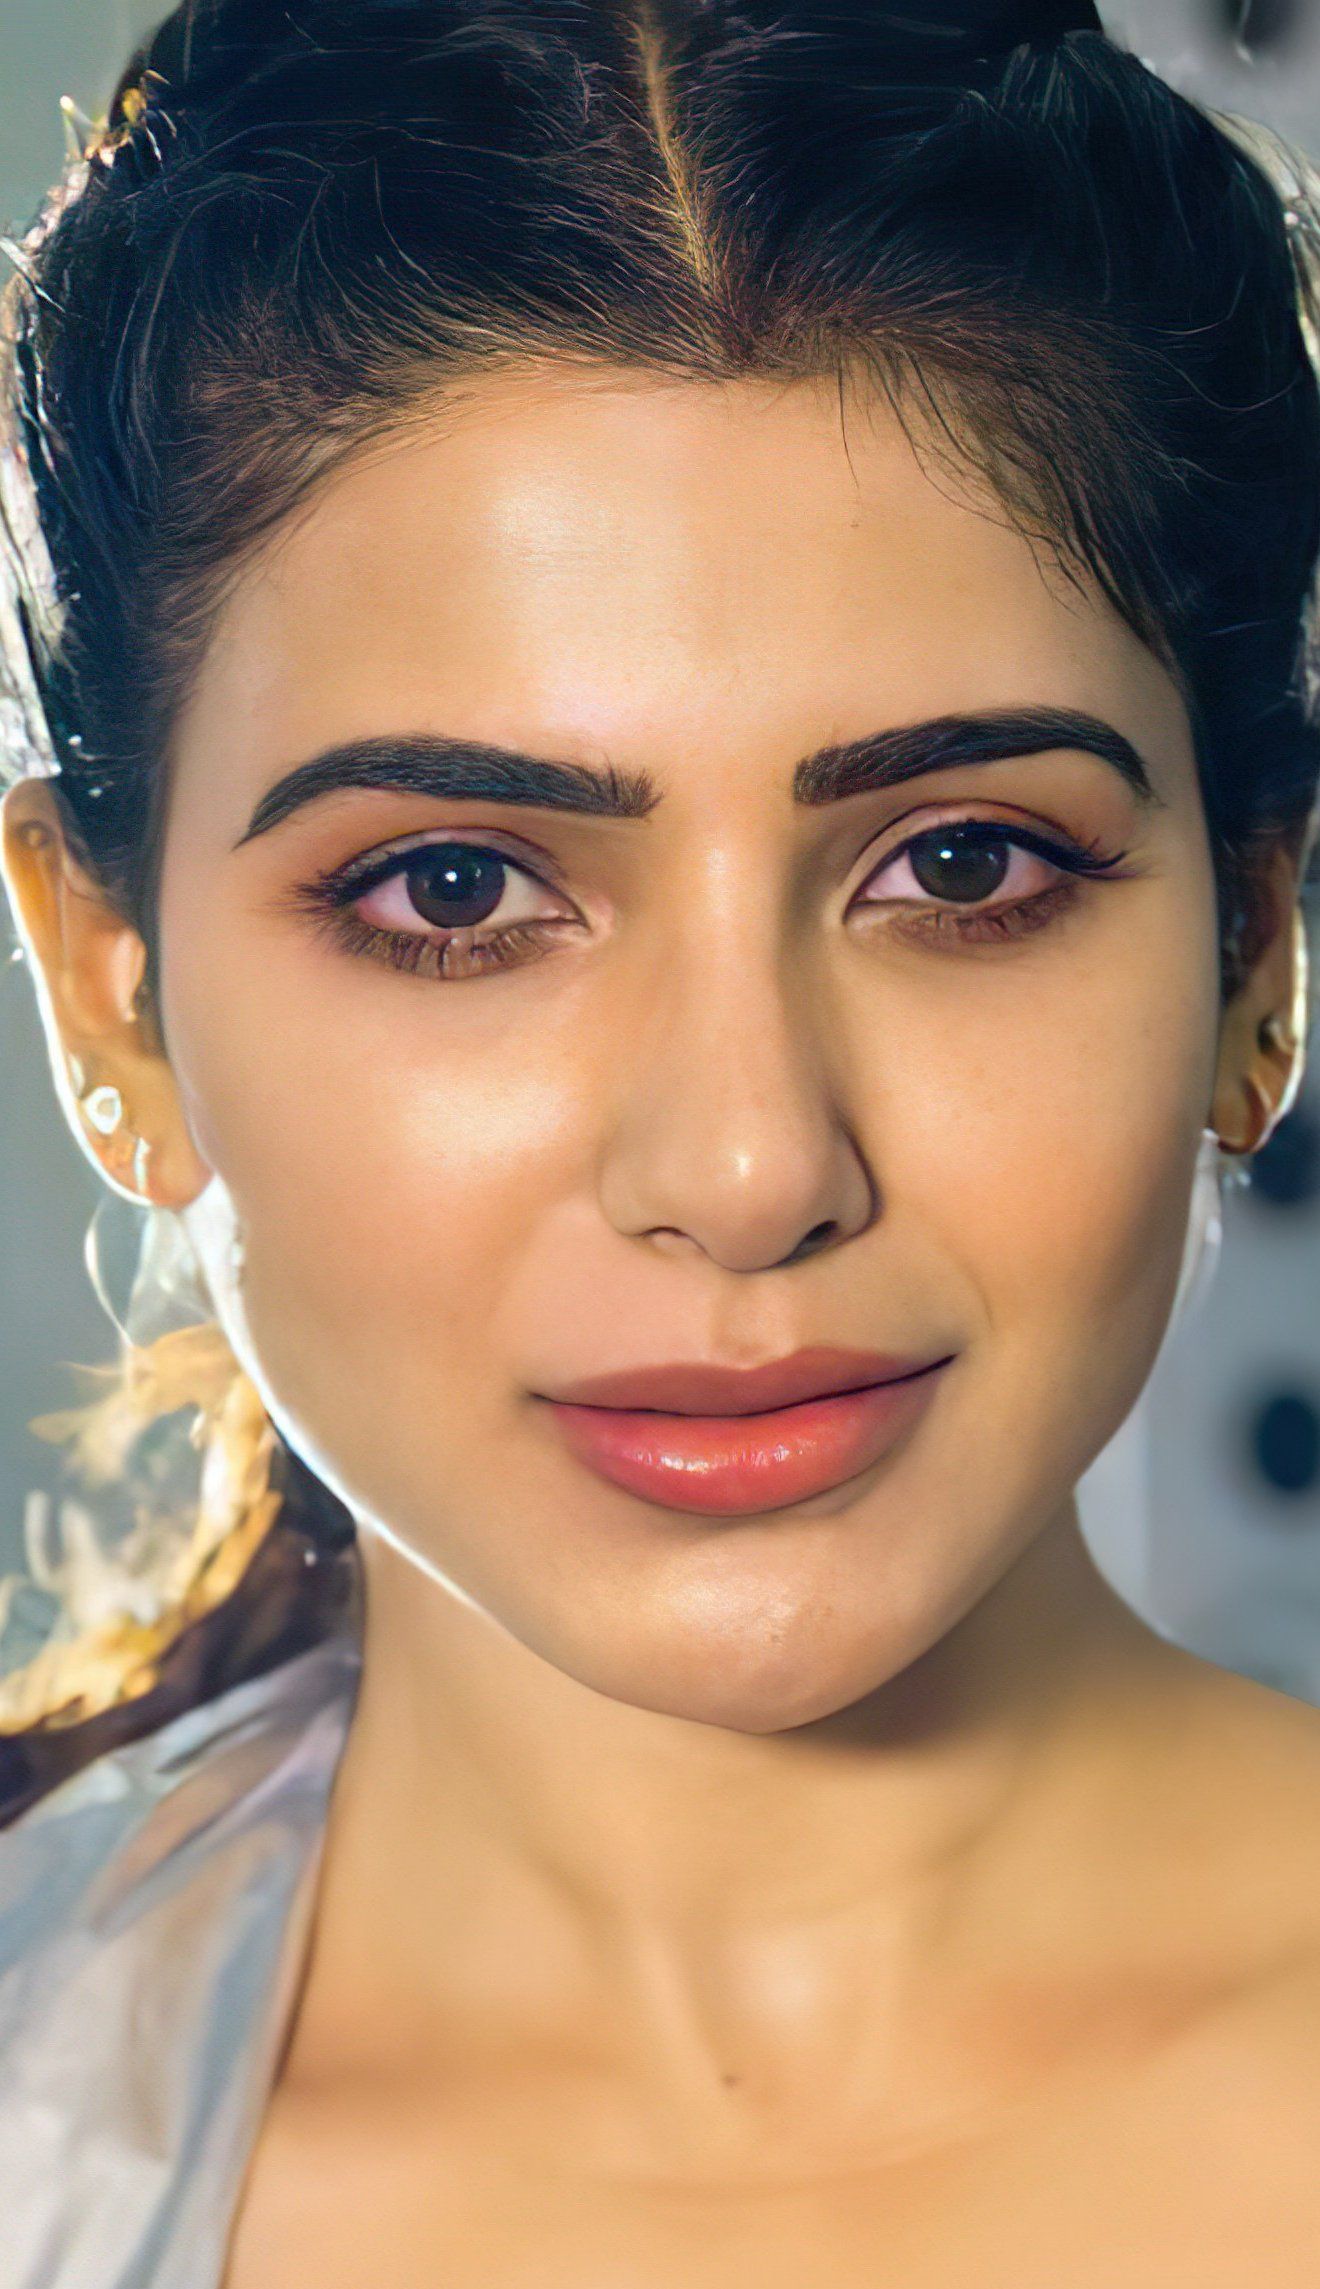 Samantha Ruth Prabhu shares a heartfelt statement and hopes her love story never comes to an end; 12 years